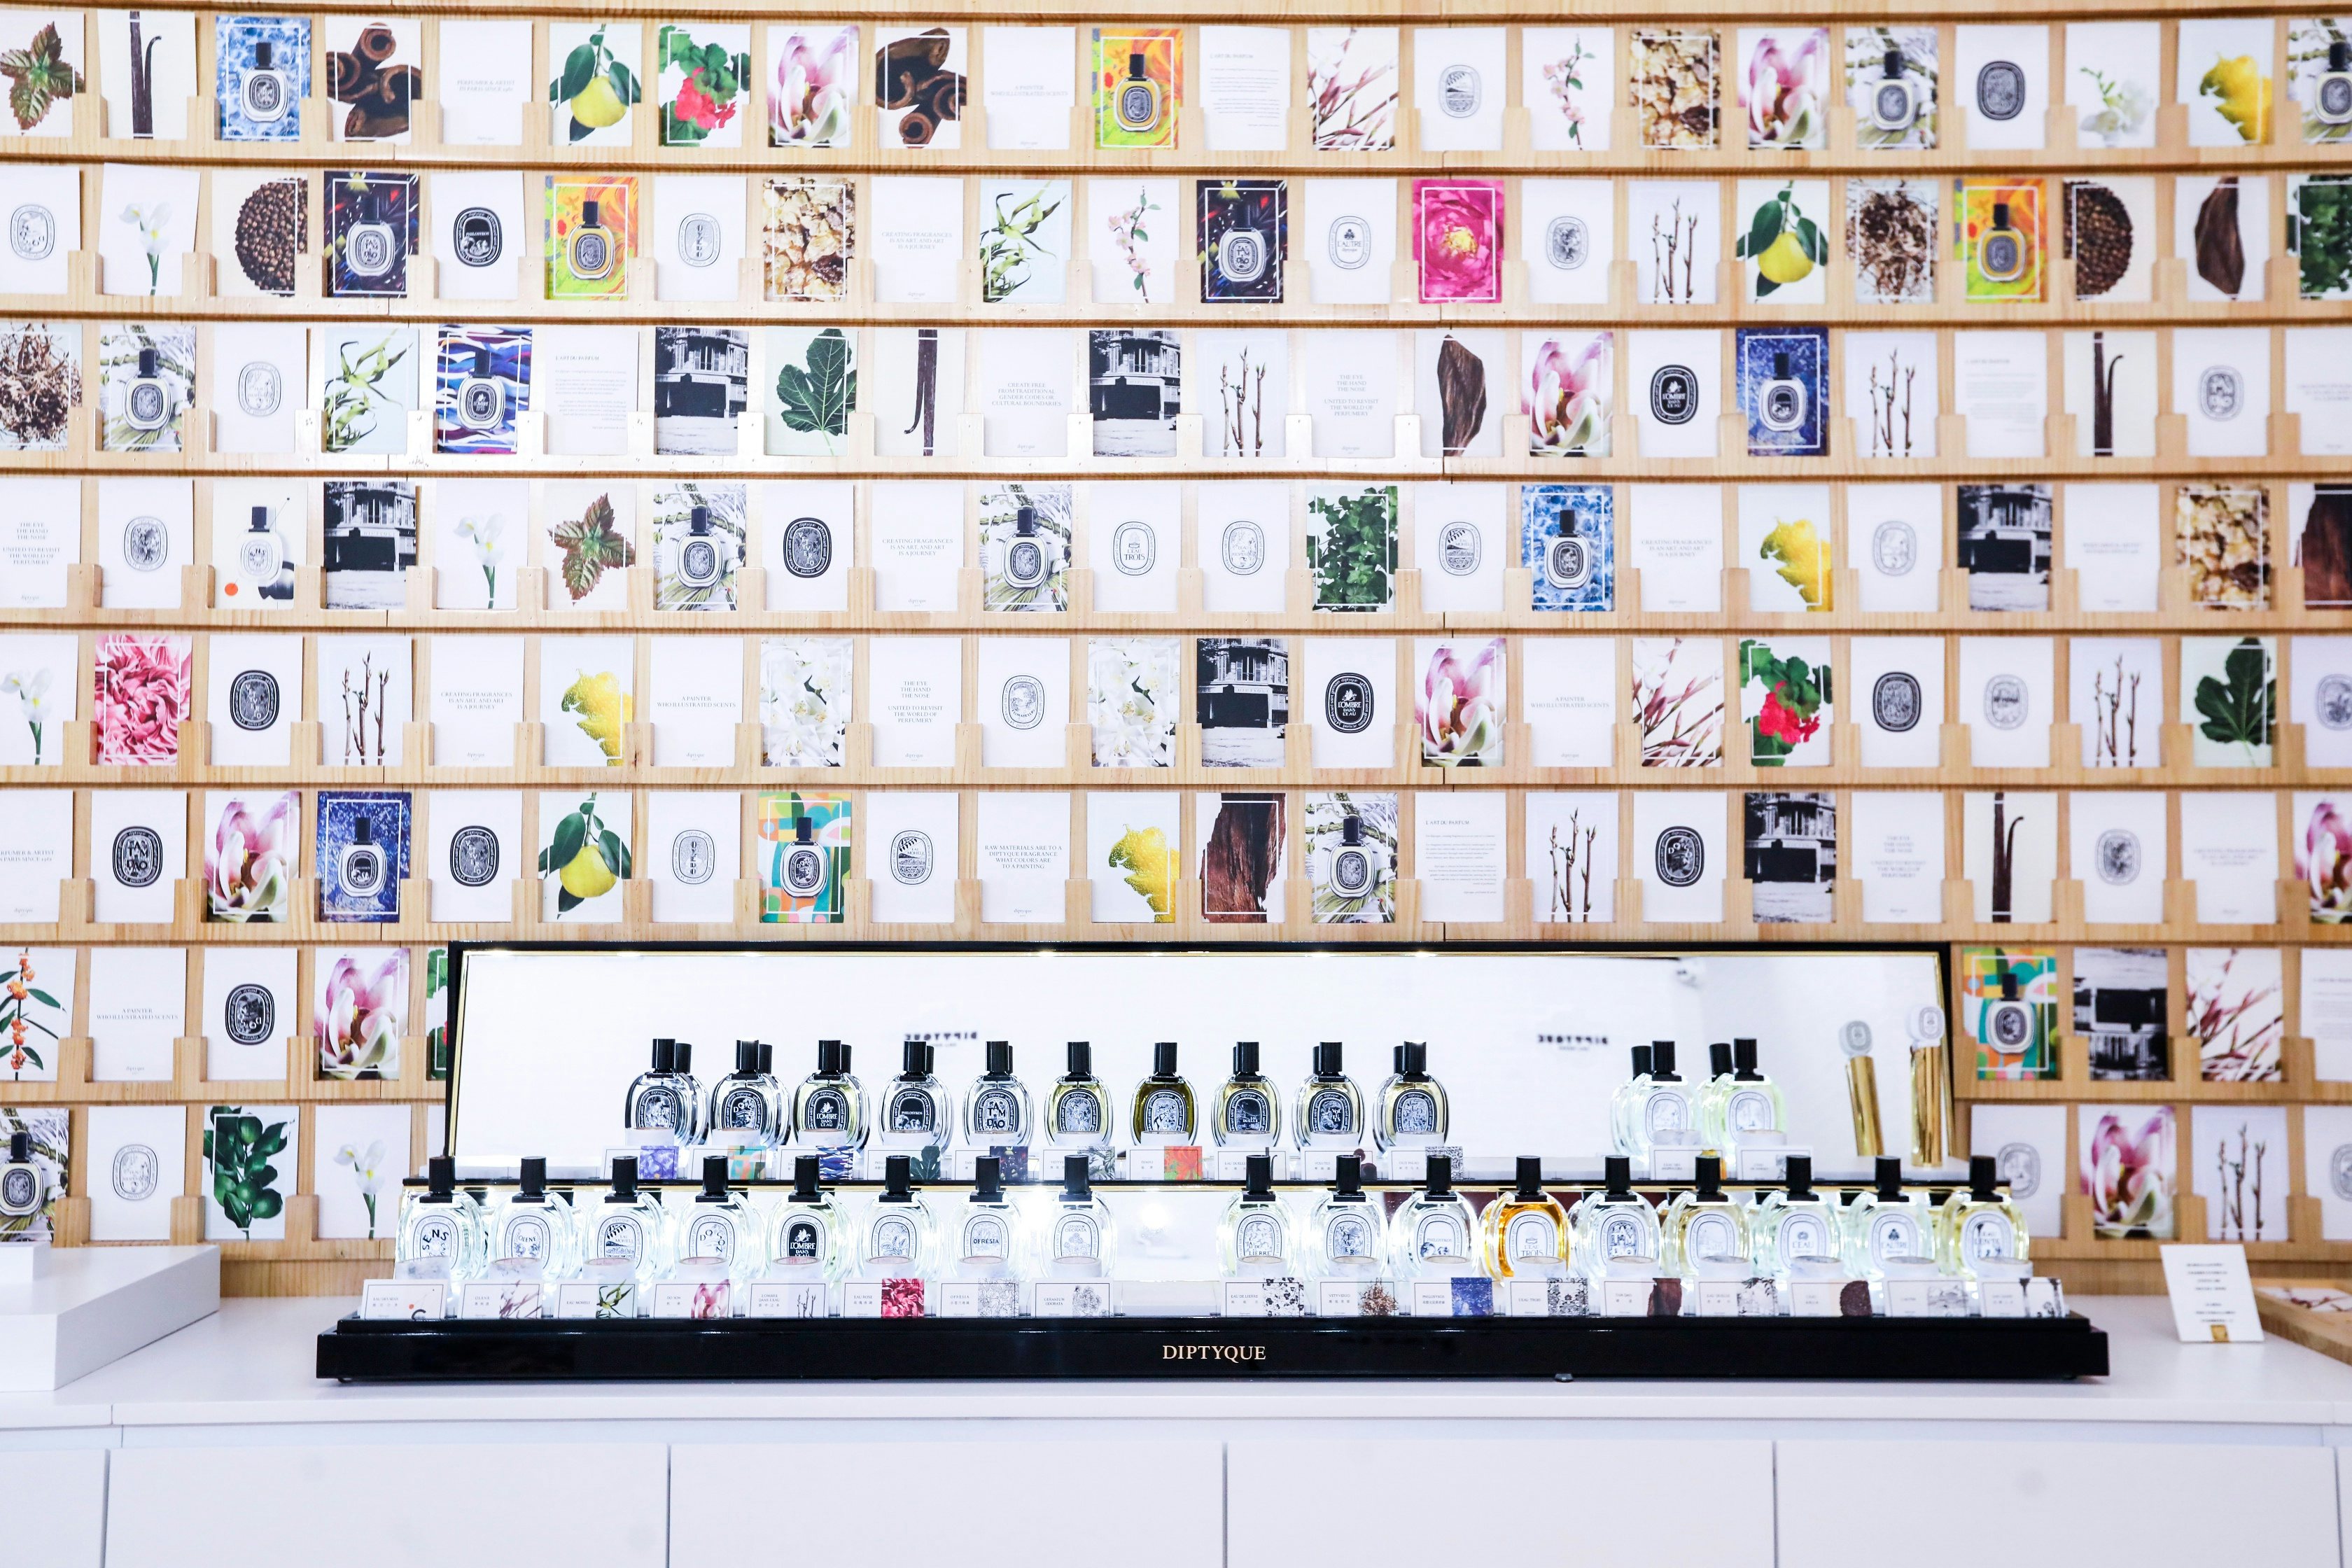 The French niche fragrance brand Diptyque, famous for its chic candles, perfumes, and accessories is having a breakout moment in China. Courtesy photo